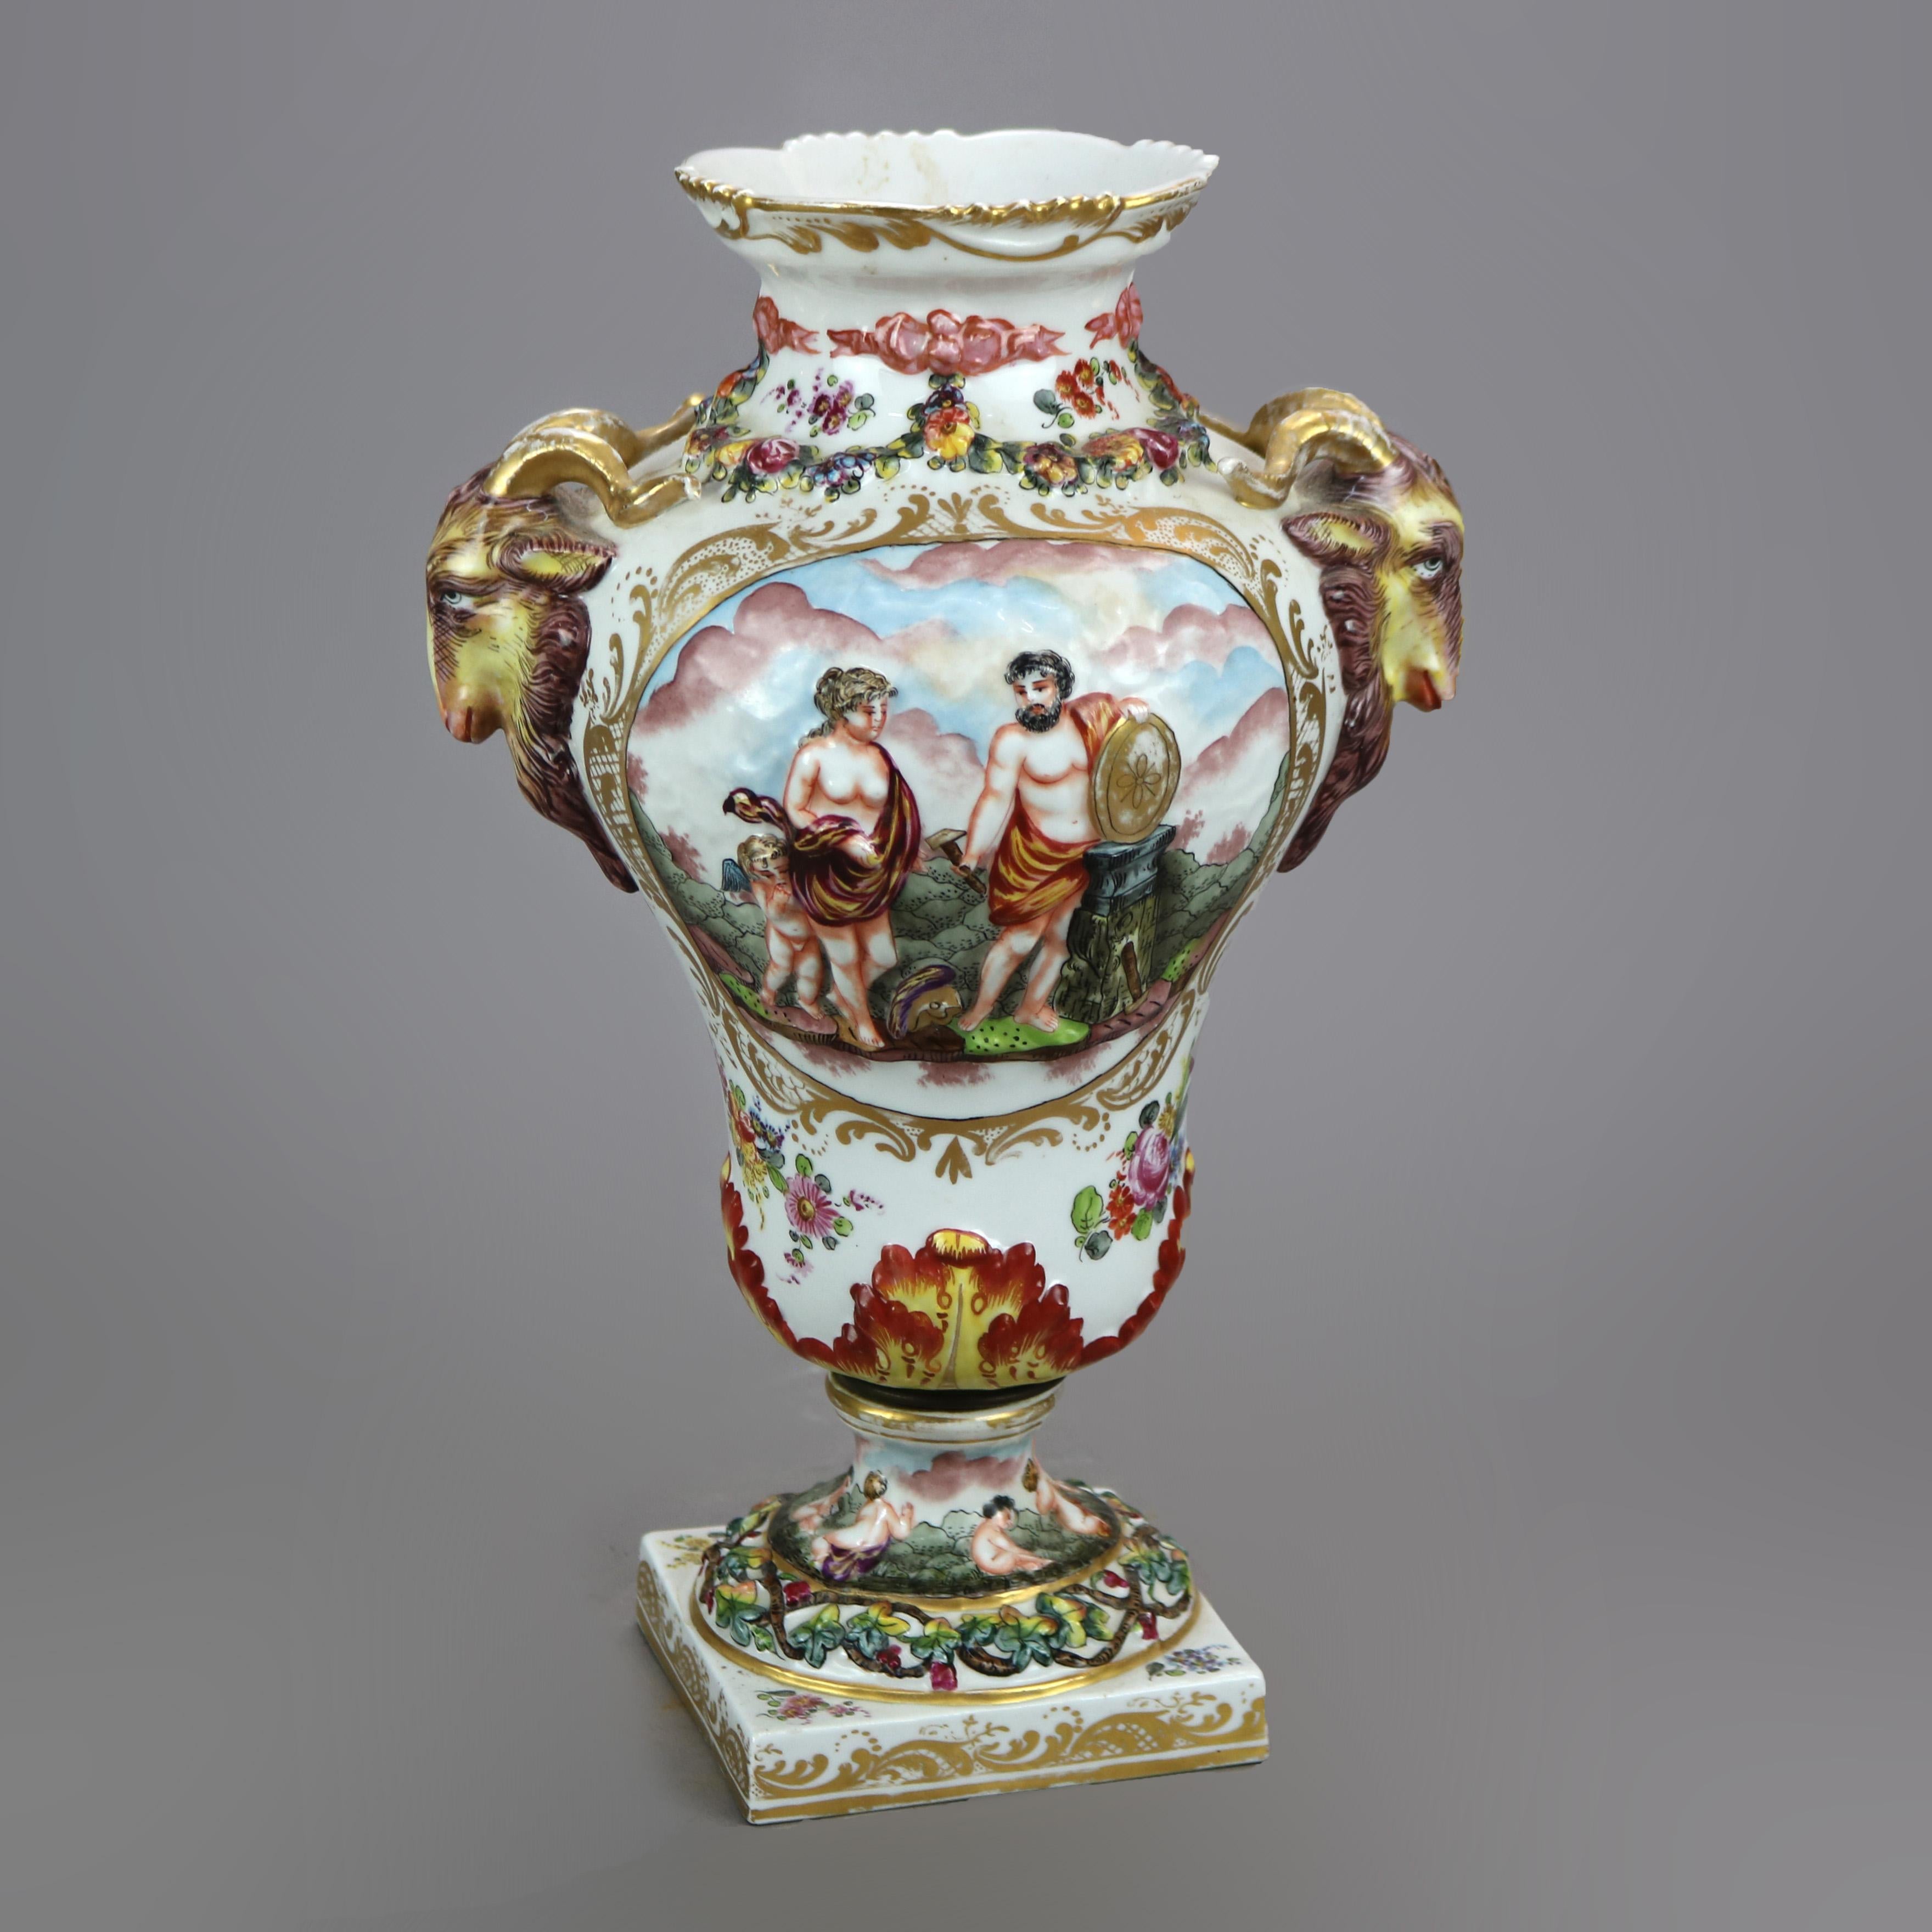 Classical Greek Antique Pair German Saxony Porcelain Urns with Classical Scenes in Relief, c1860